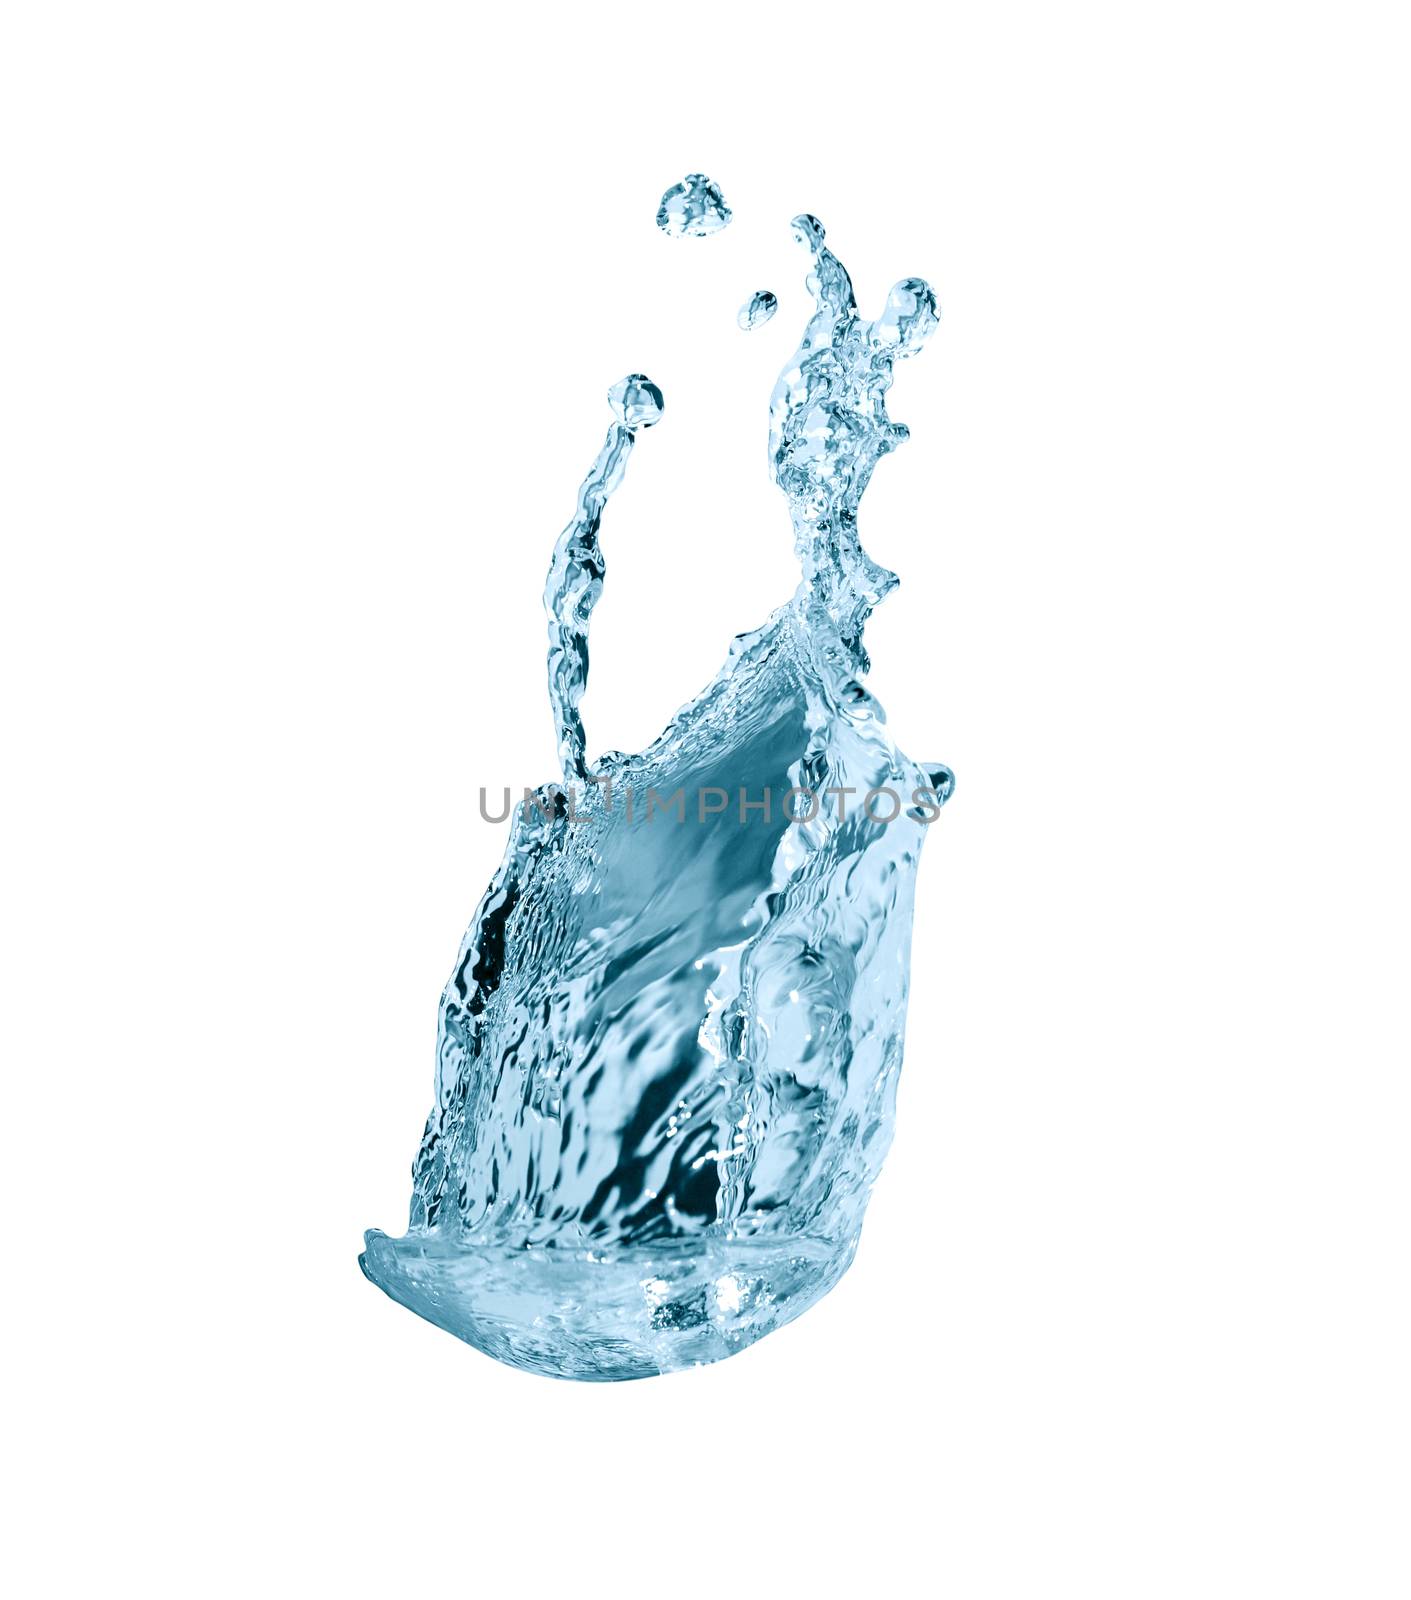 Nice abstract blue water splash on white background